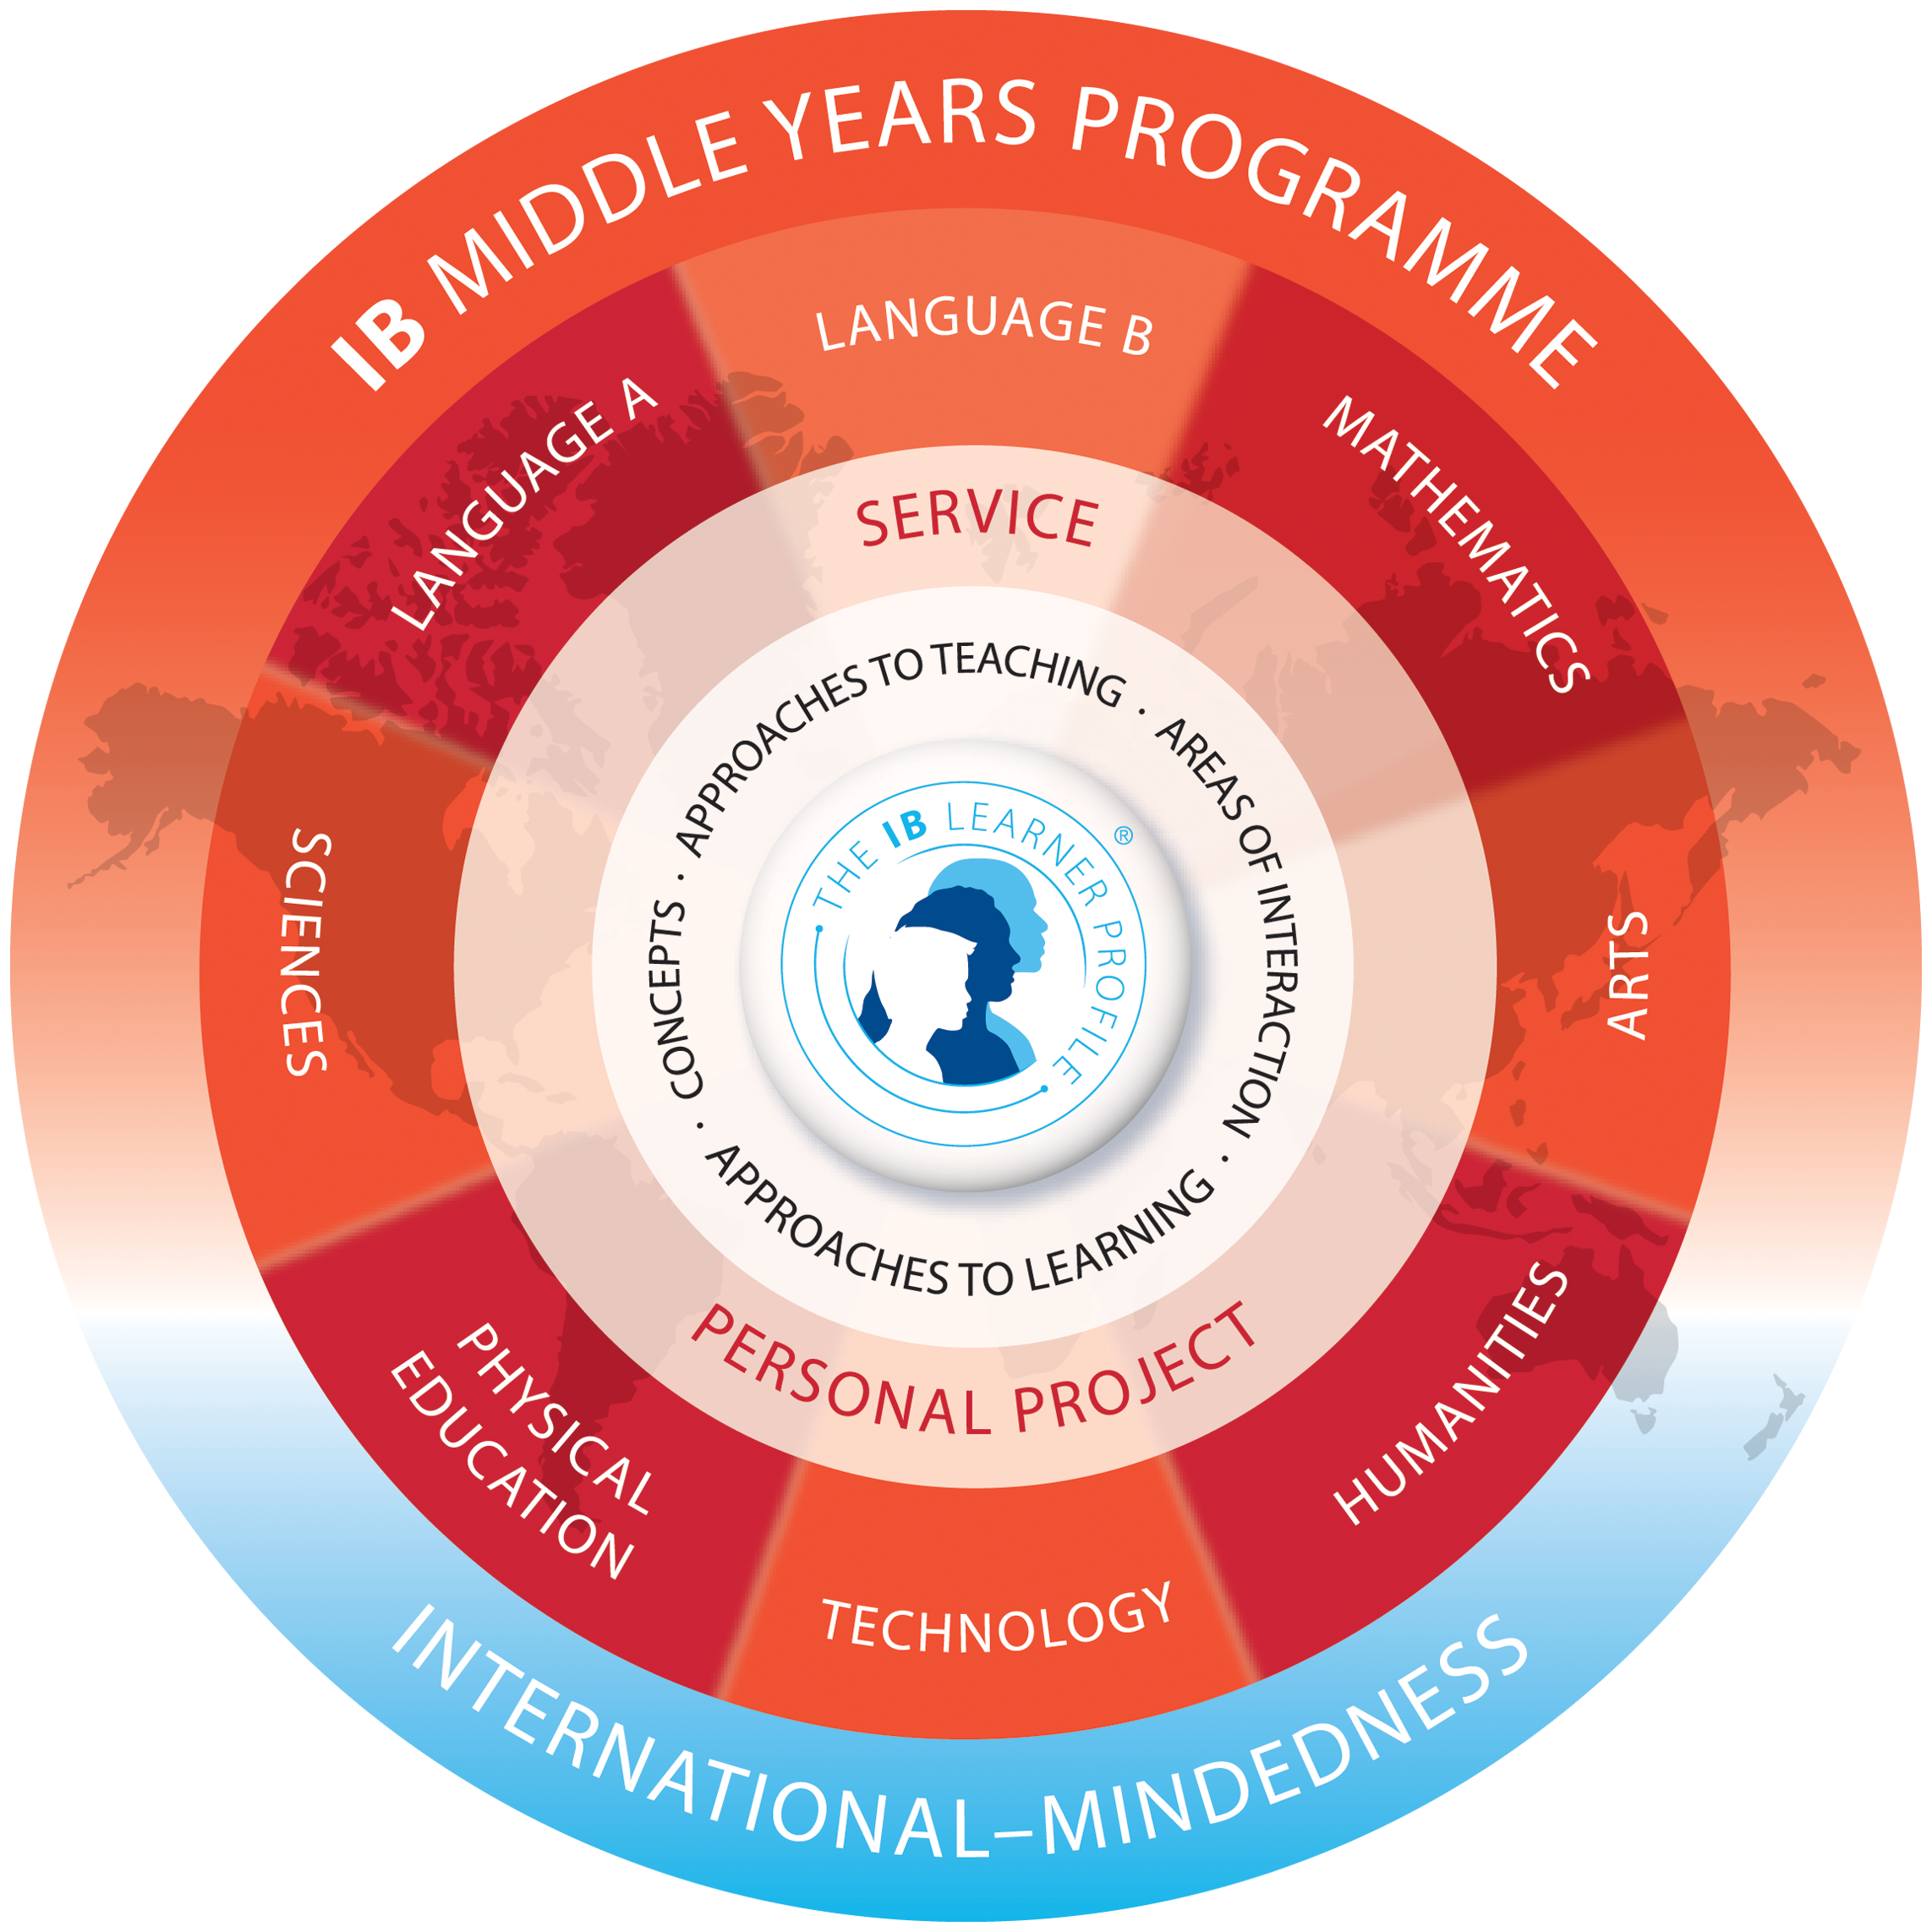 red circle with Middle Years Program